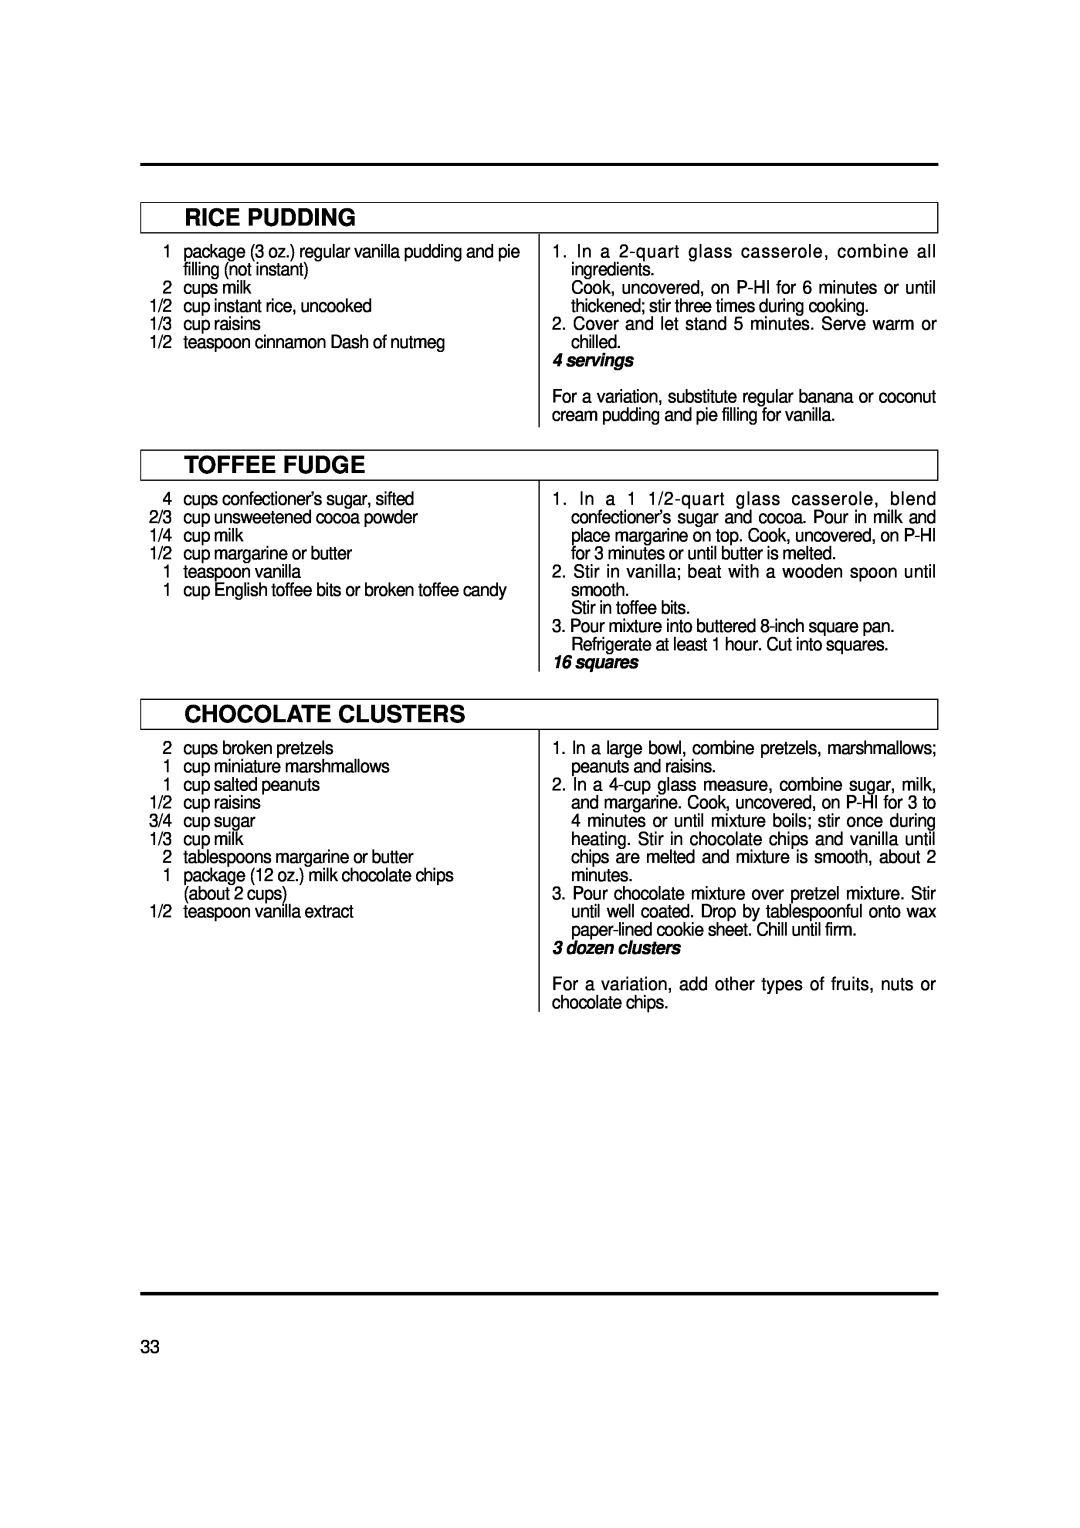 Magic Chef MCO2212ARW manual Rice Pudding, Toffee Fudge, Chocolate Clusters, squares, dozen clusters, servings 